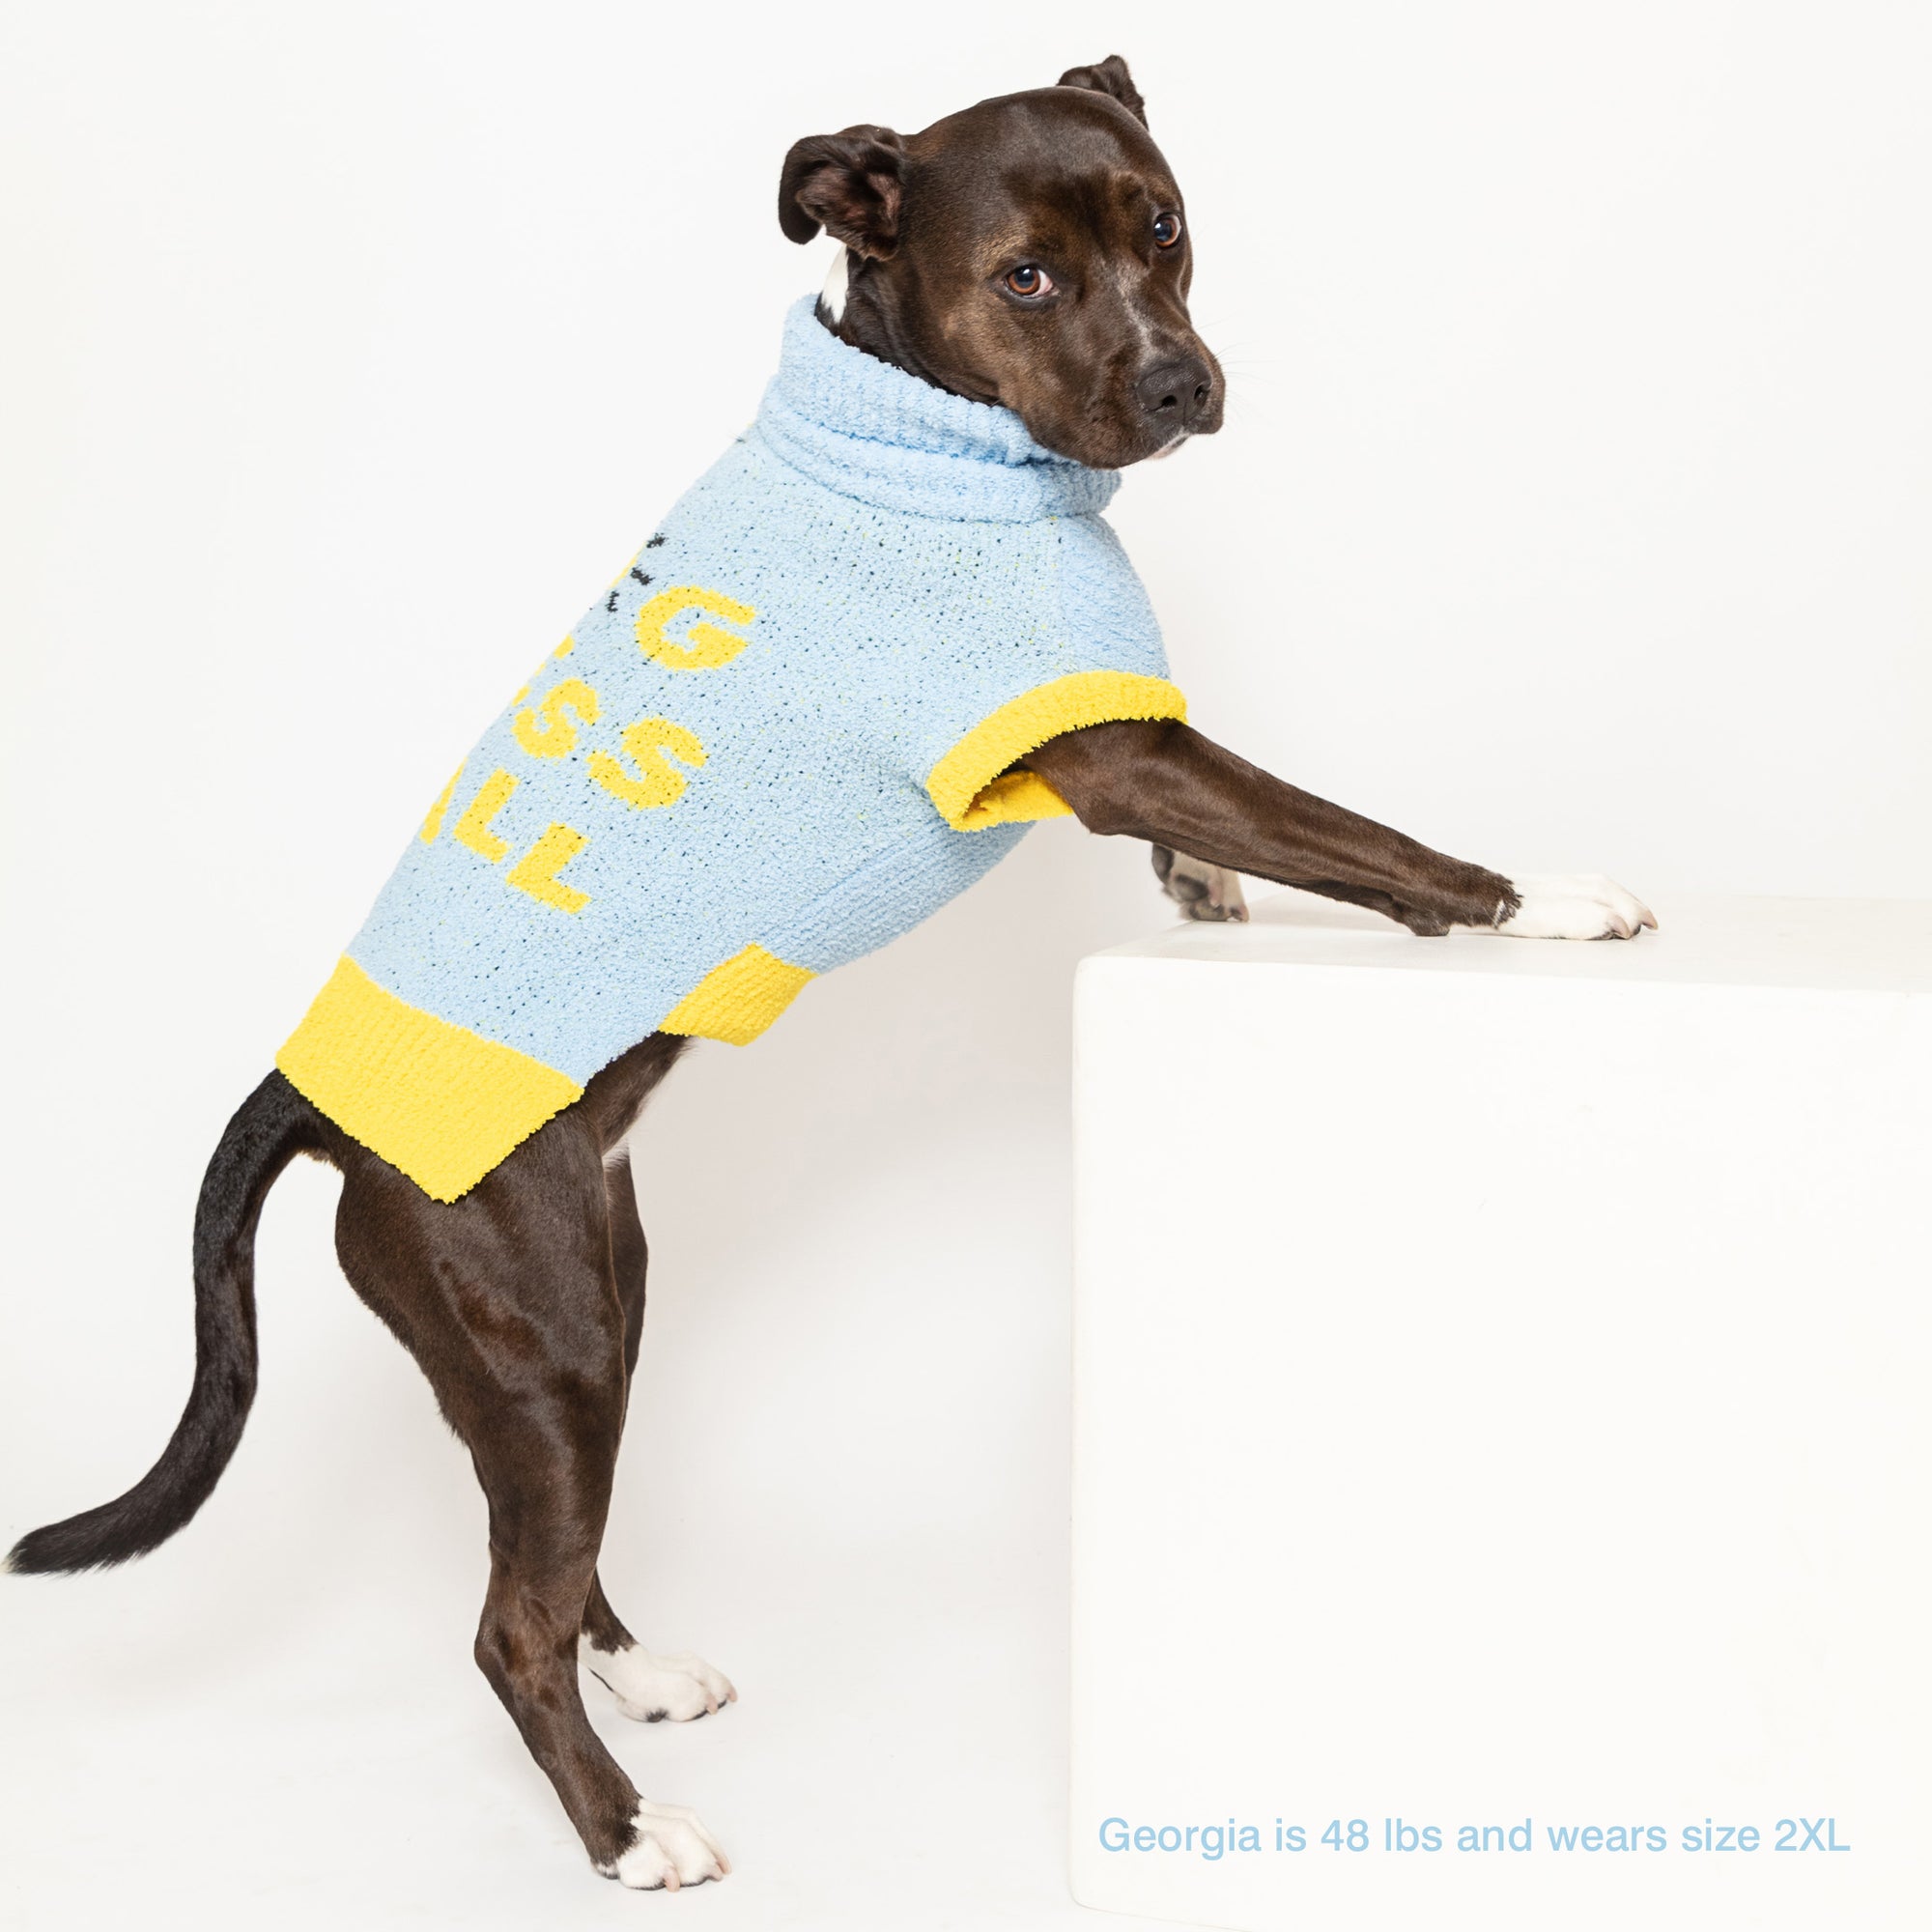  Dog named Georgia, 48 lbs, in a 2XL light blue "The Furryfolks" sweater, with a white background.